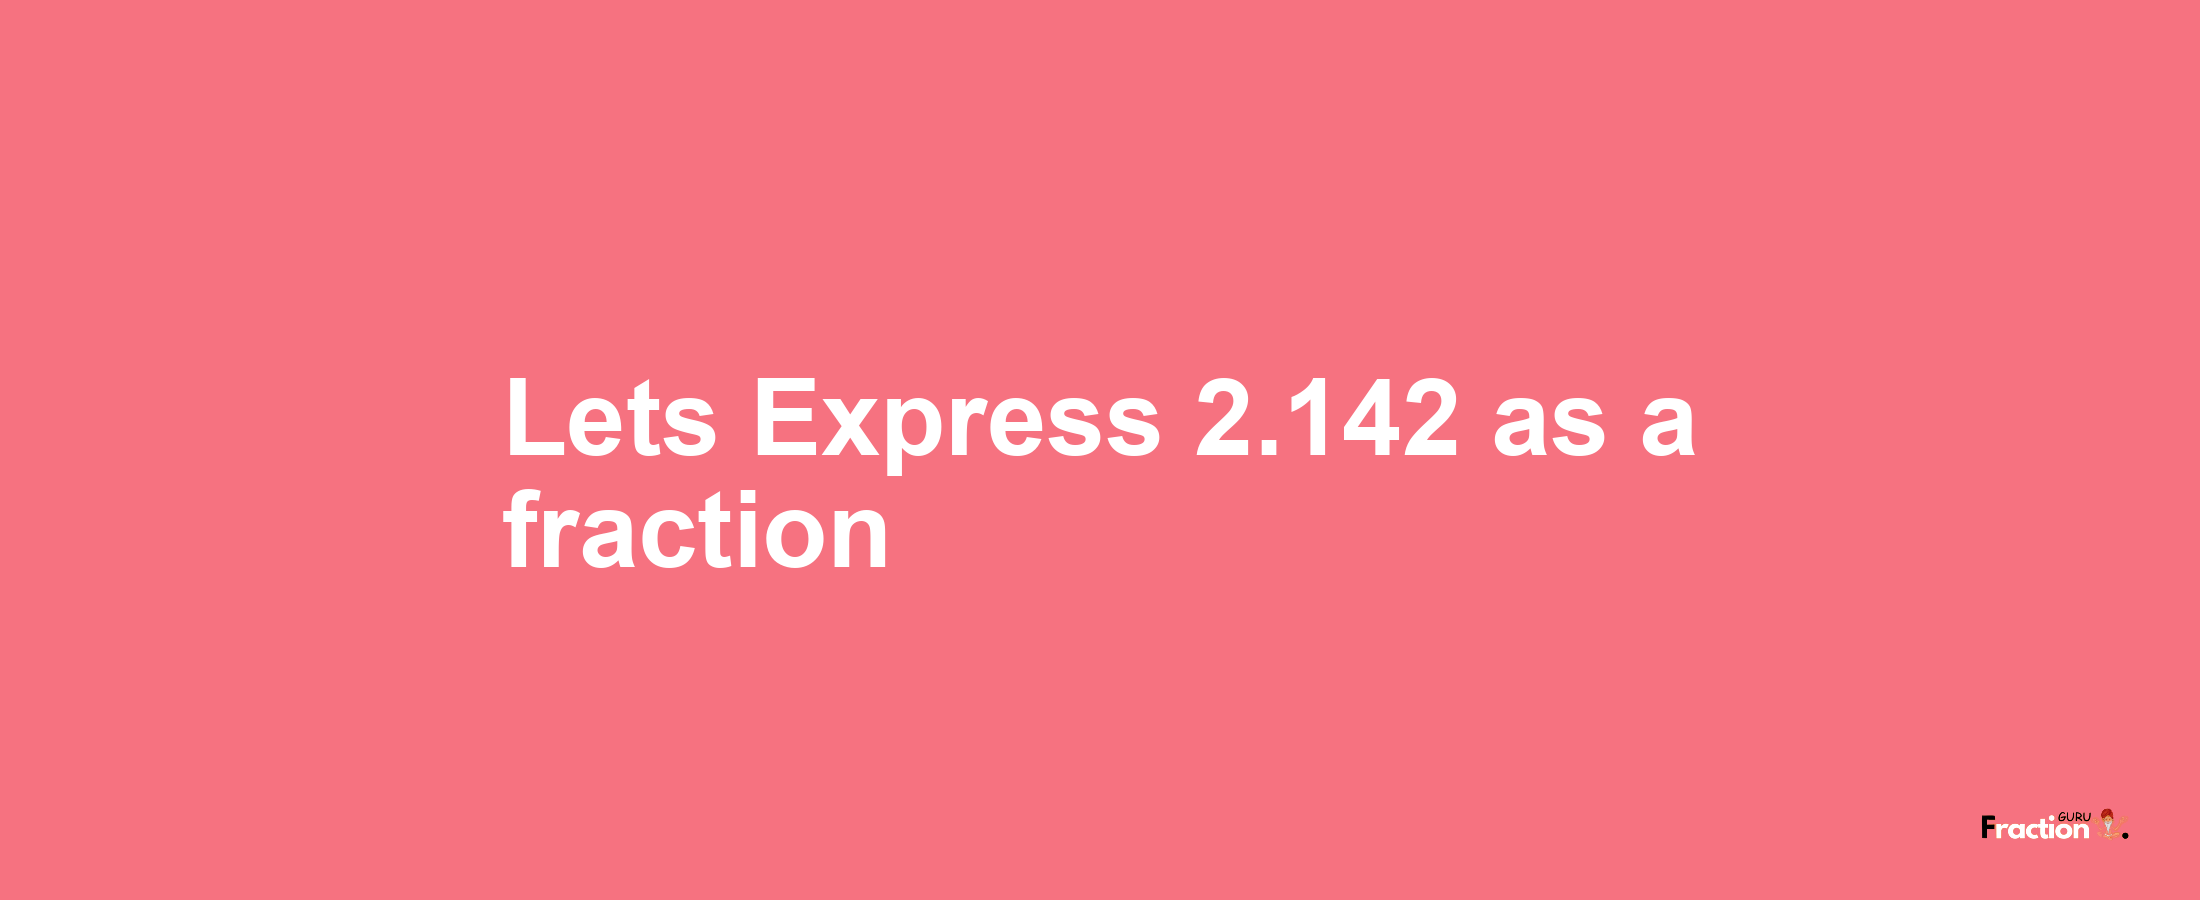 Lets Express 2.142 as afraction